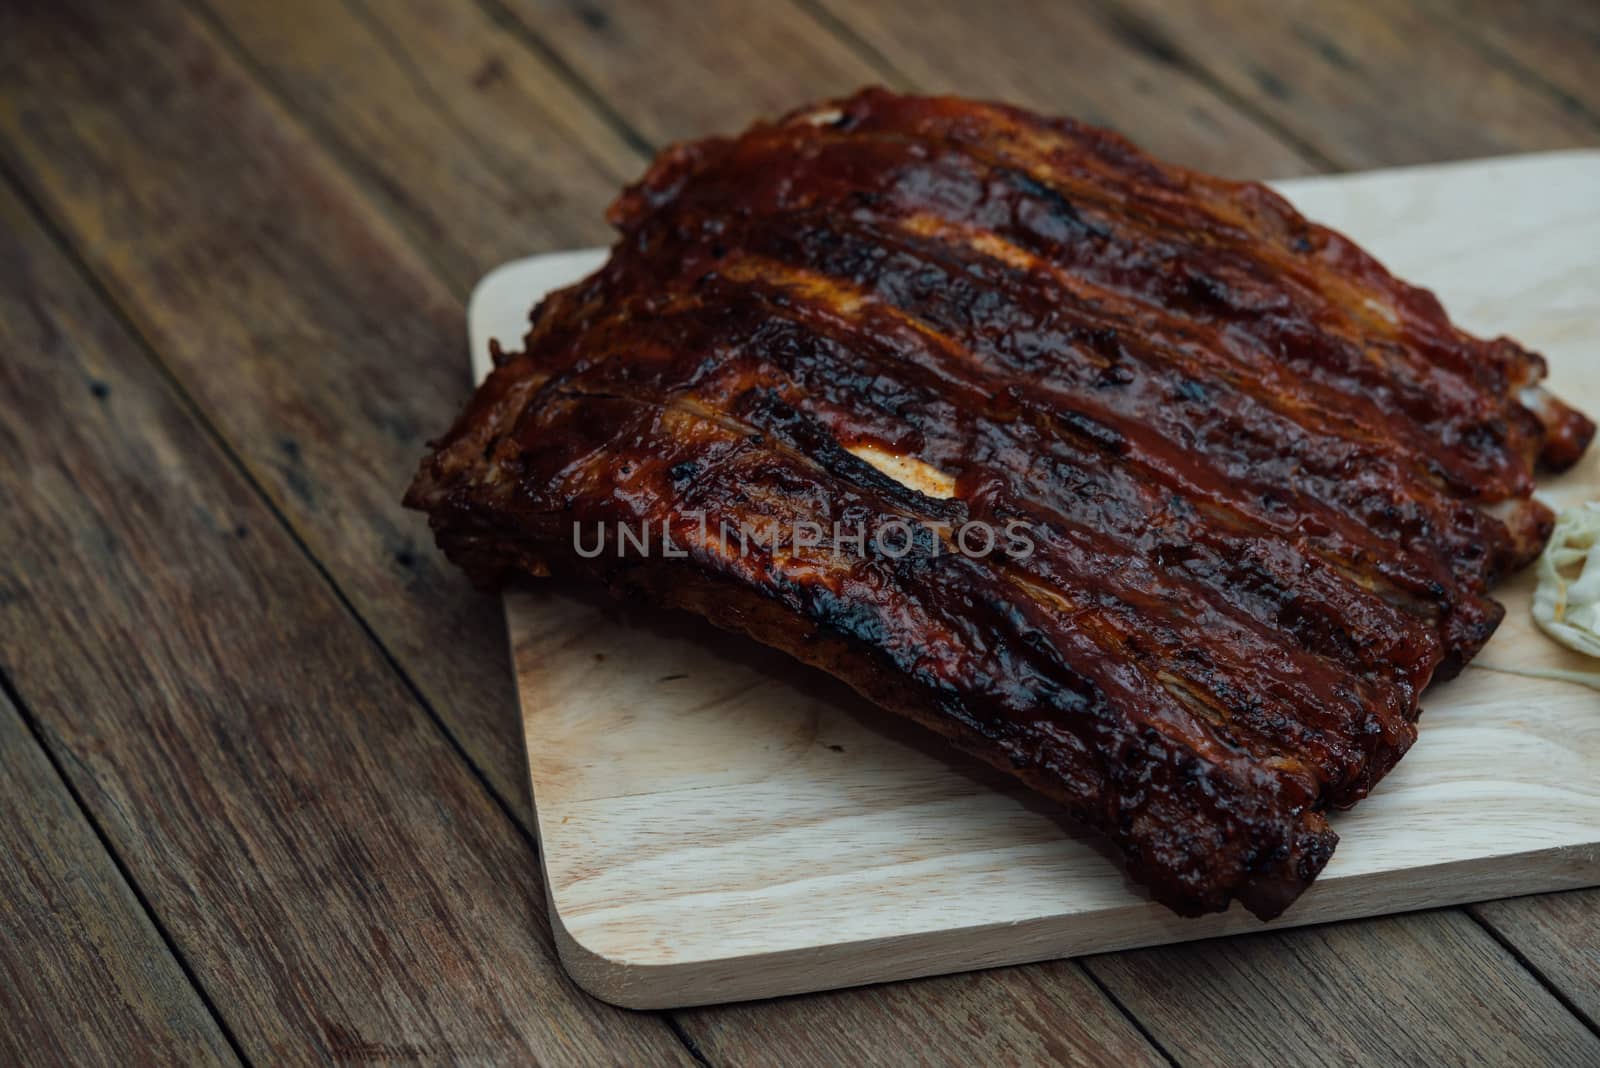 Roasted Pork Spare Ribs Barbecue or Pork Ribs with BBQ Sauce on wooden cutting board in kitchen at Thai street food market or restaurant